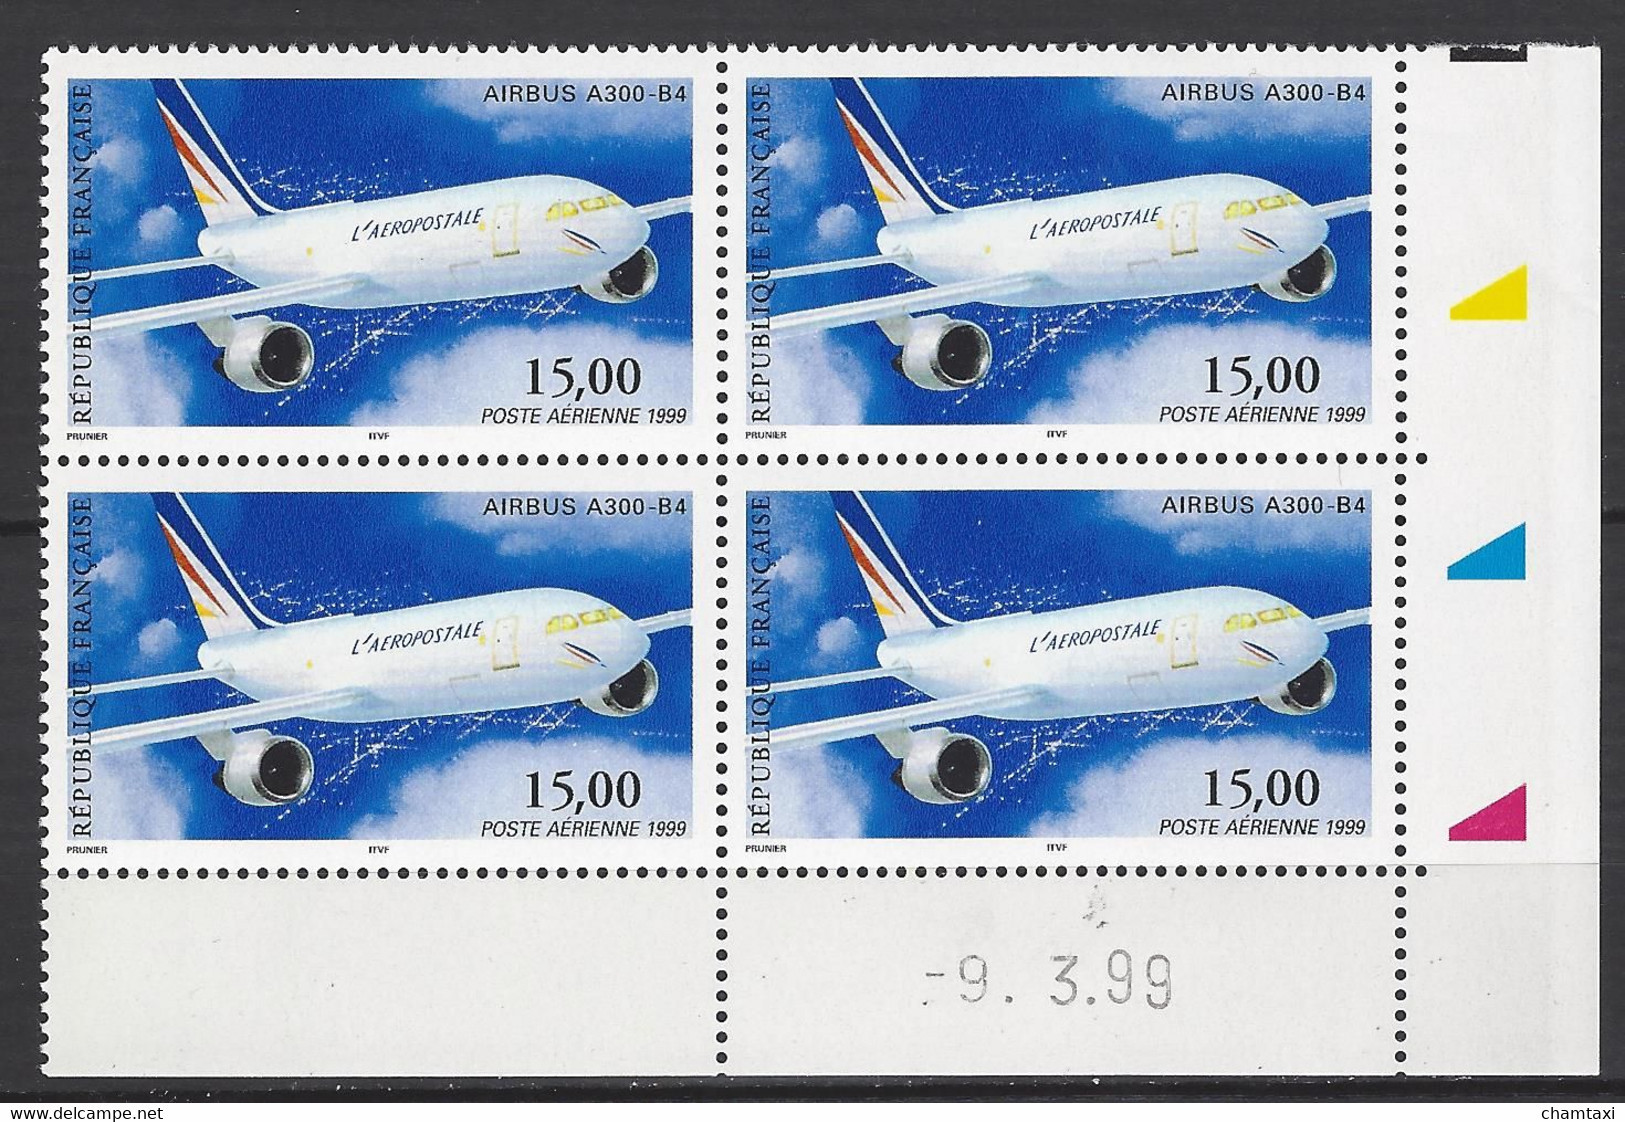 CD PA 63 FRANCE 1999 TIMBRE POSTE AERIENNE 63 AIRBUS A 300 B4  COIN DATE 63 : 9 / 3 / 99 - Luchtpost